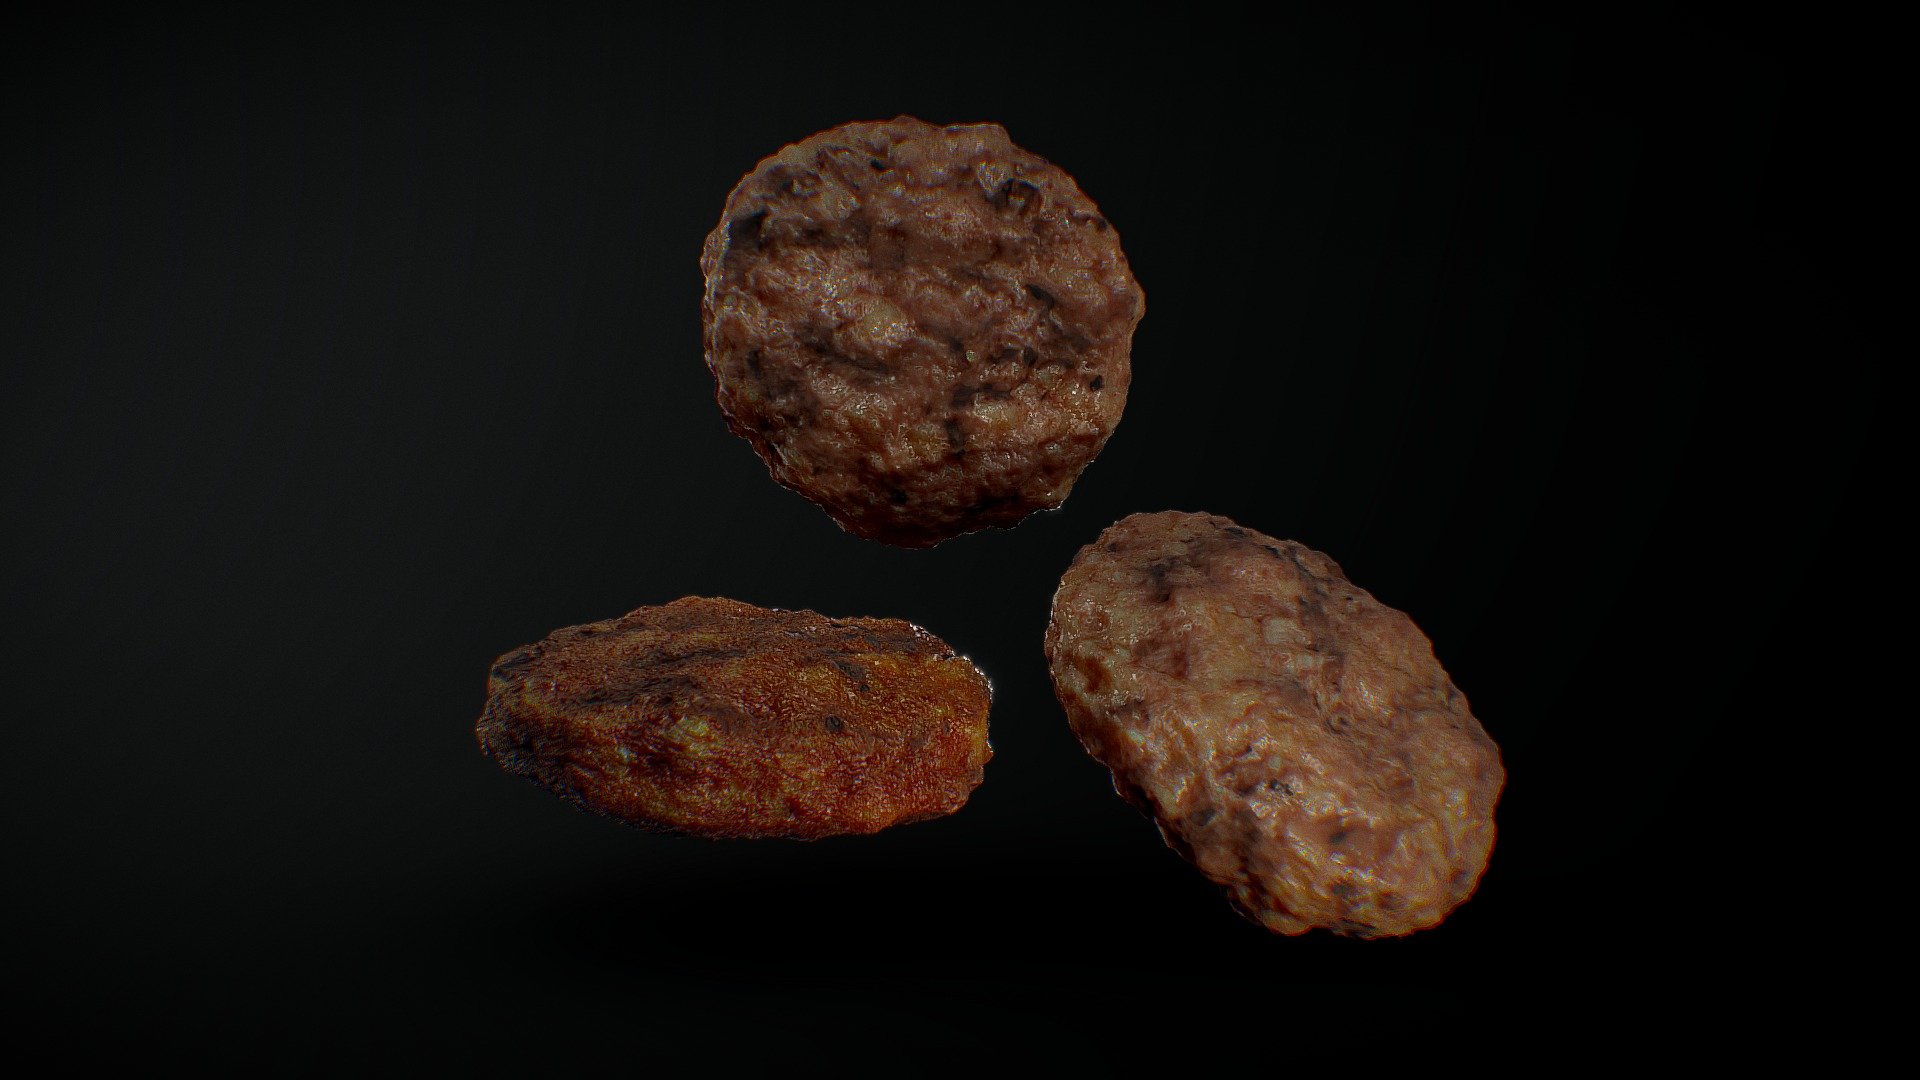 3d model of beef patty for making steak to use in burger 3d model